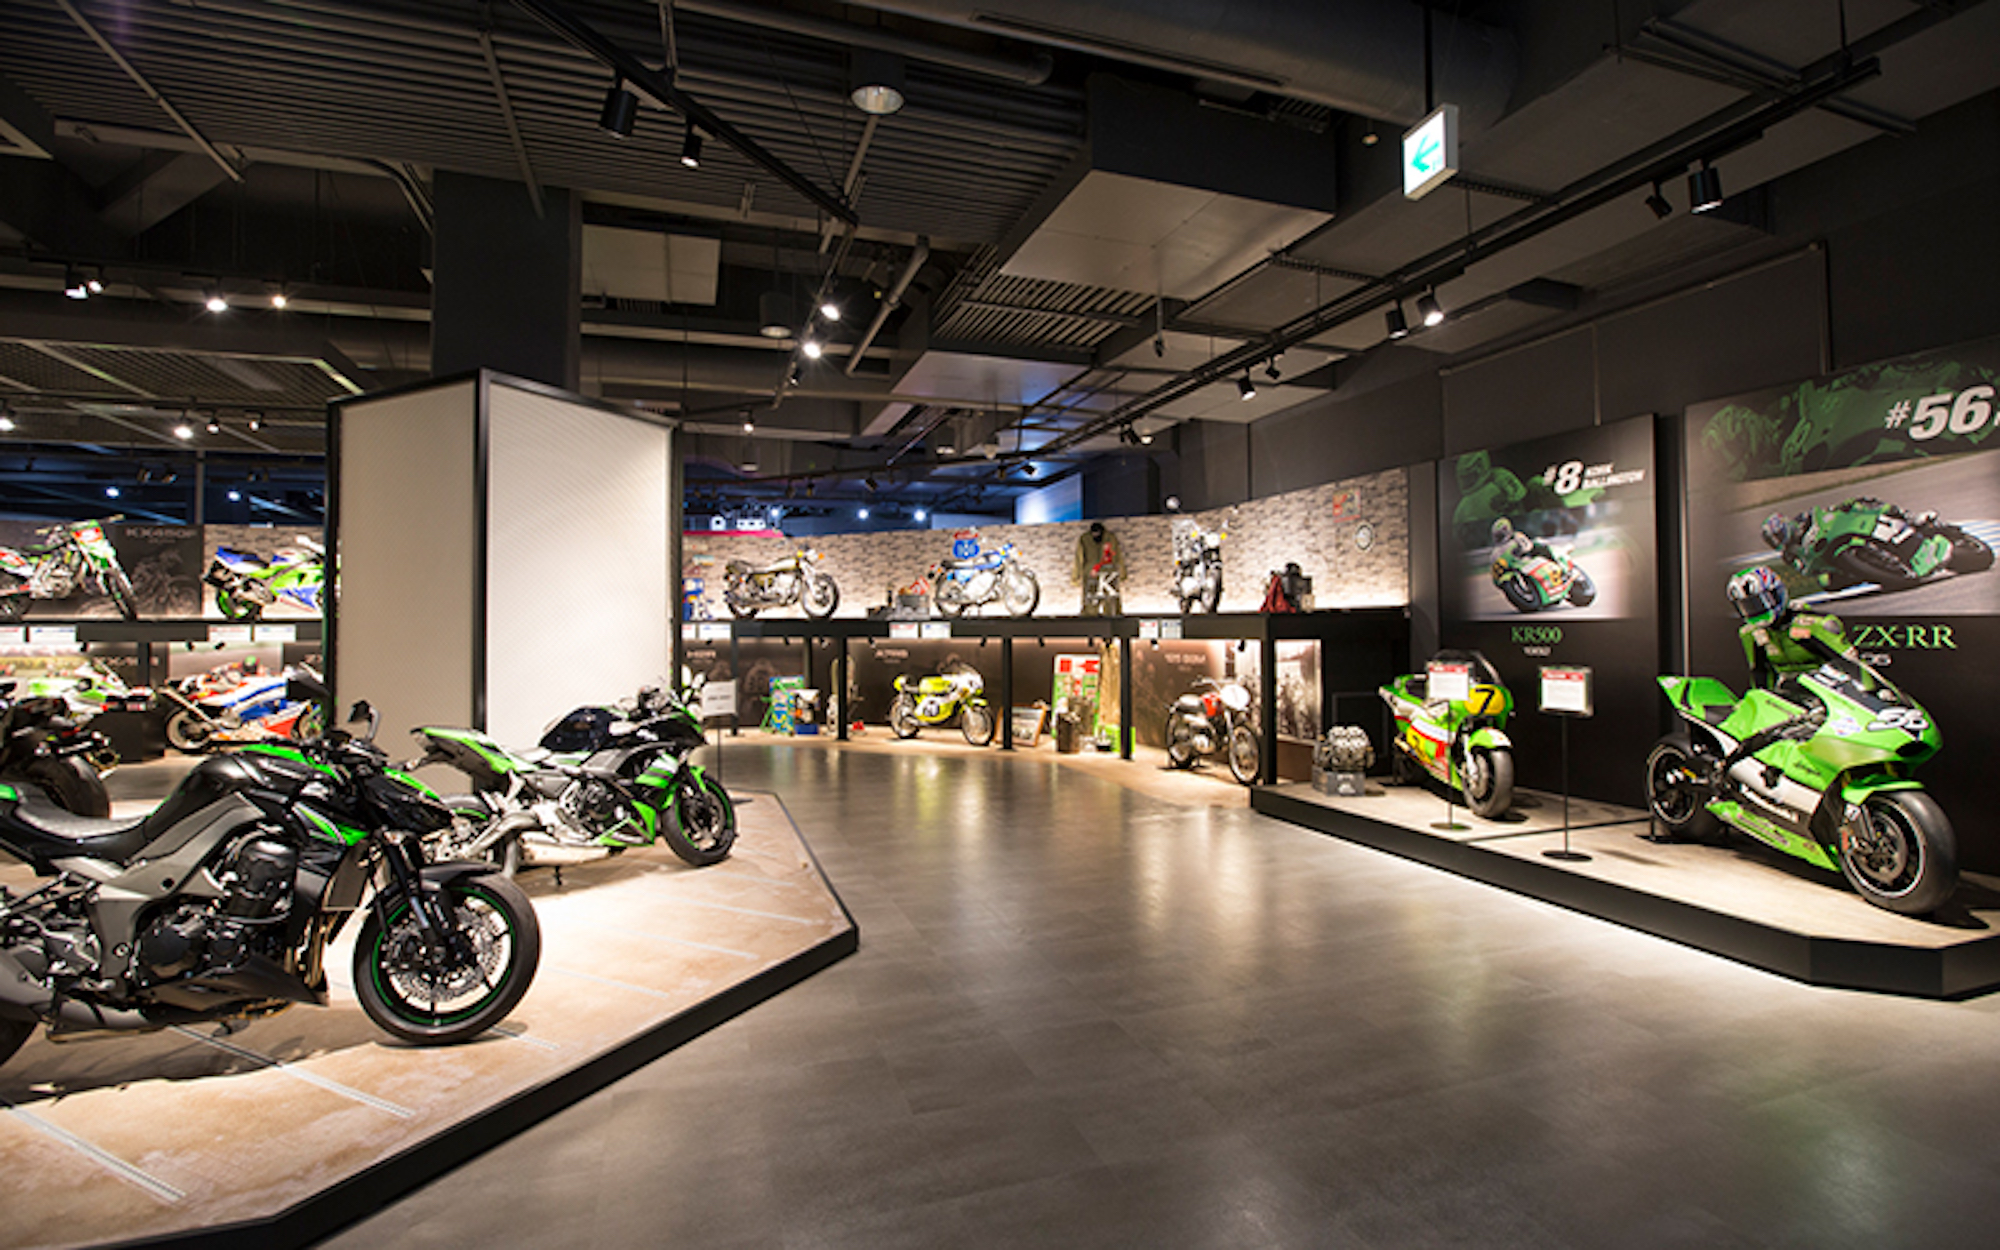 A view of the Kawasaki museum. media sourced from the Kawasaki global site.